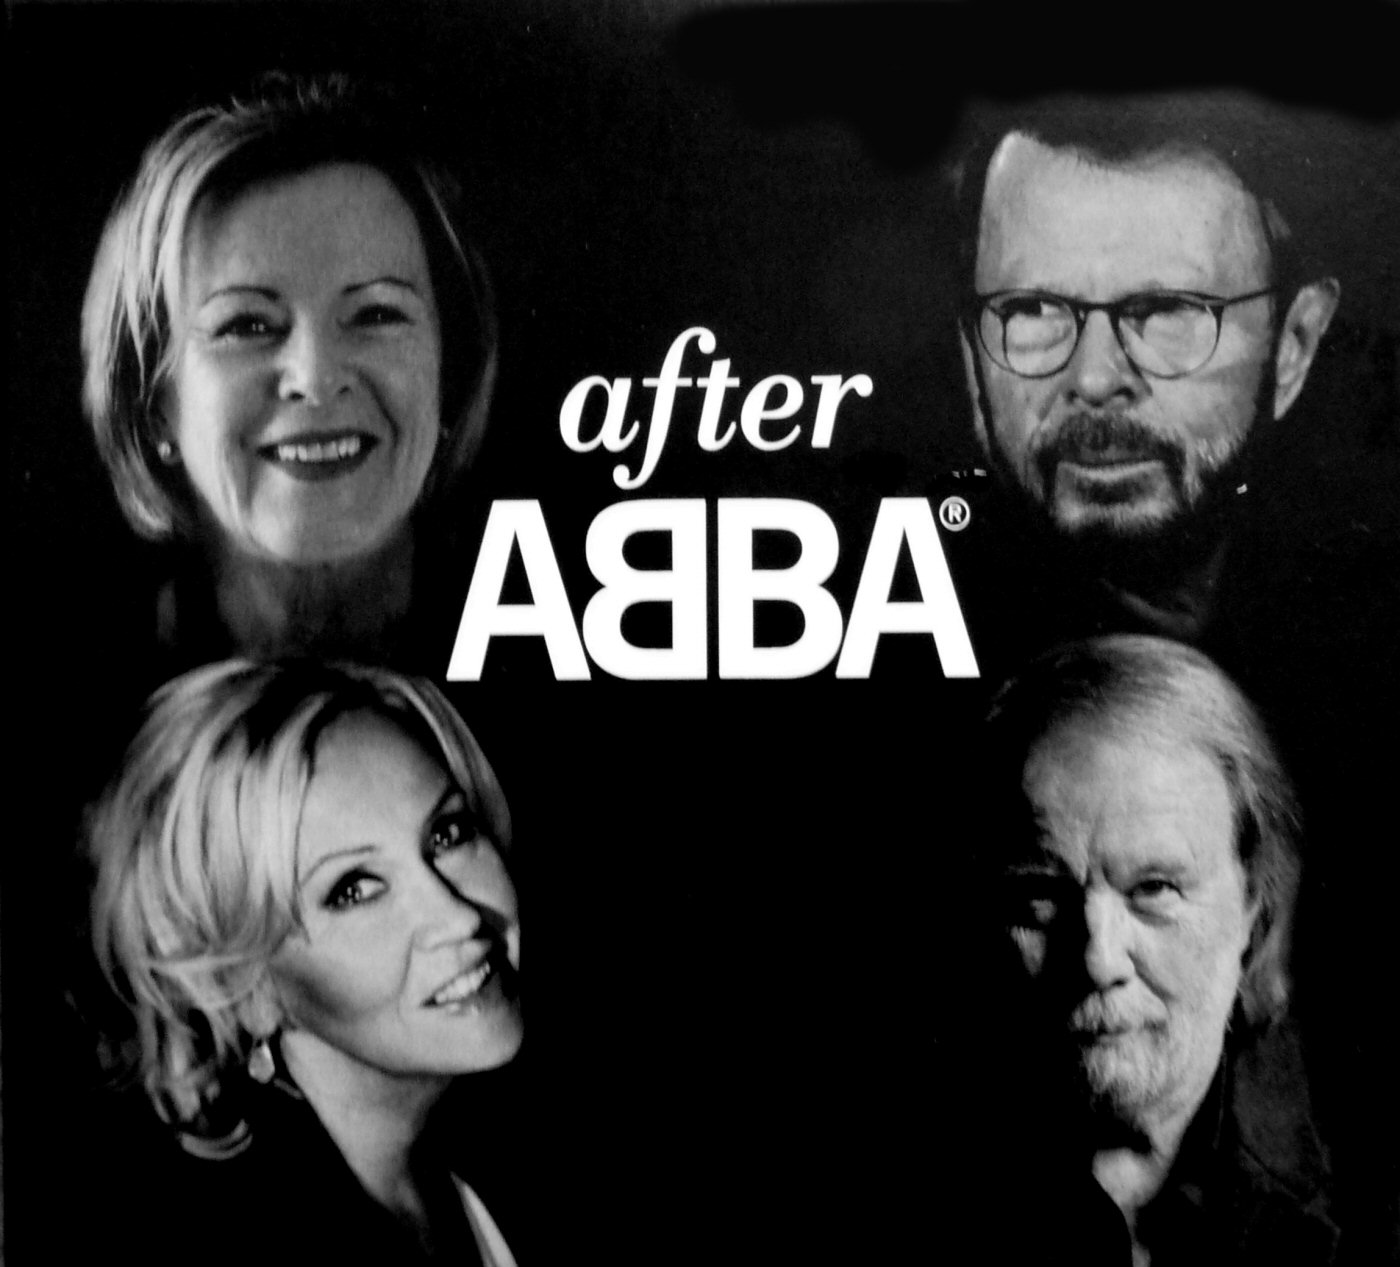 After ABBA